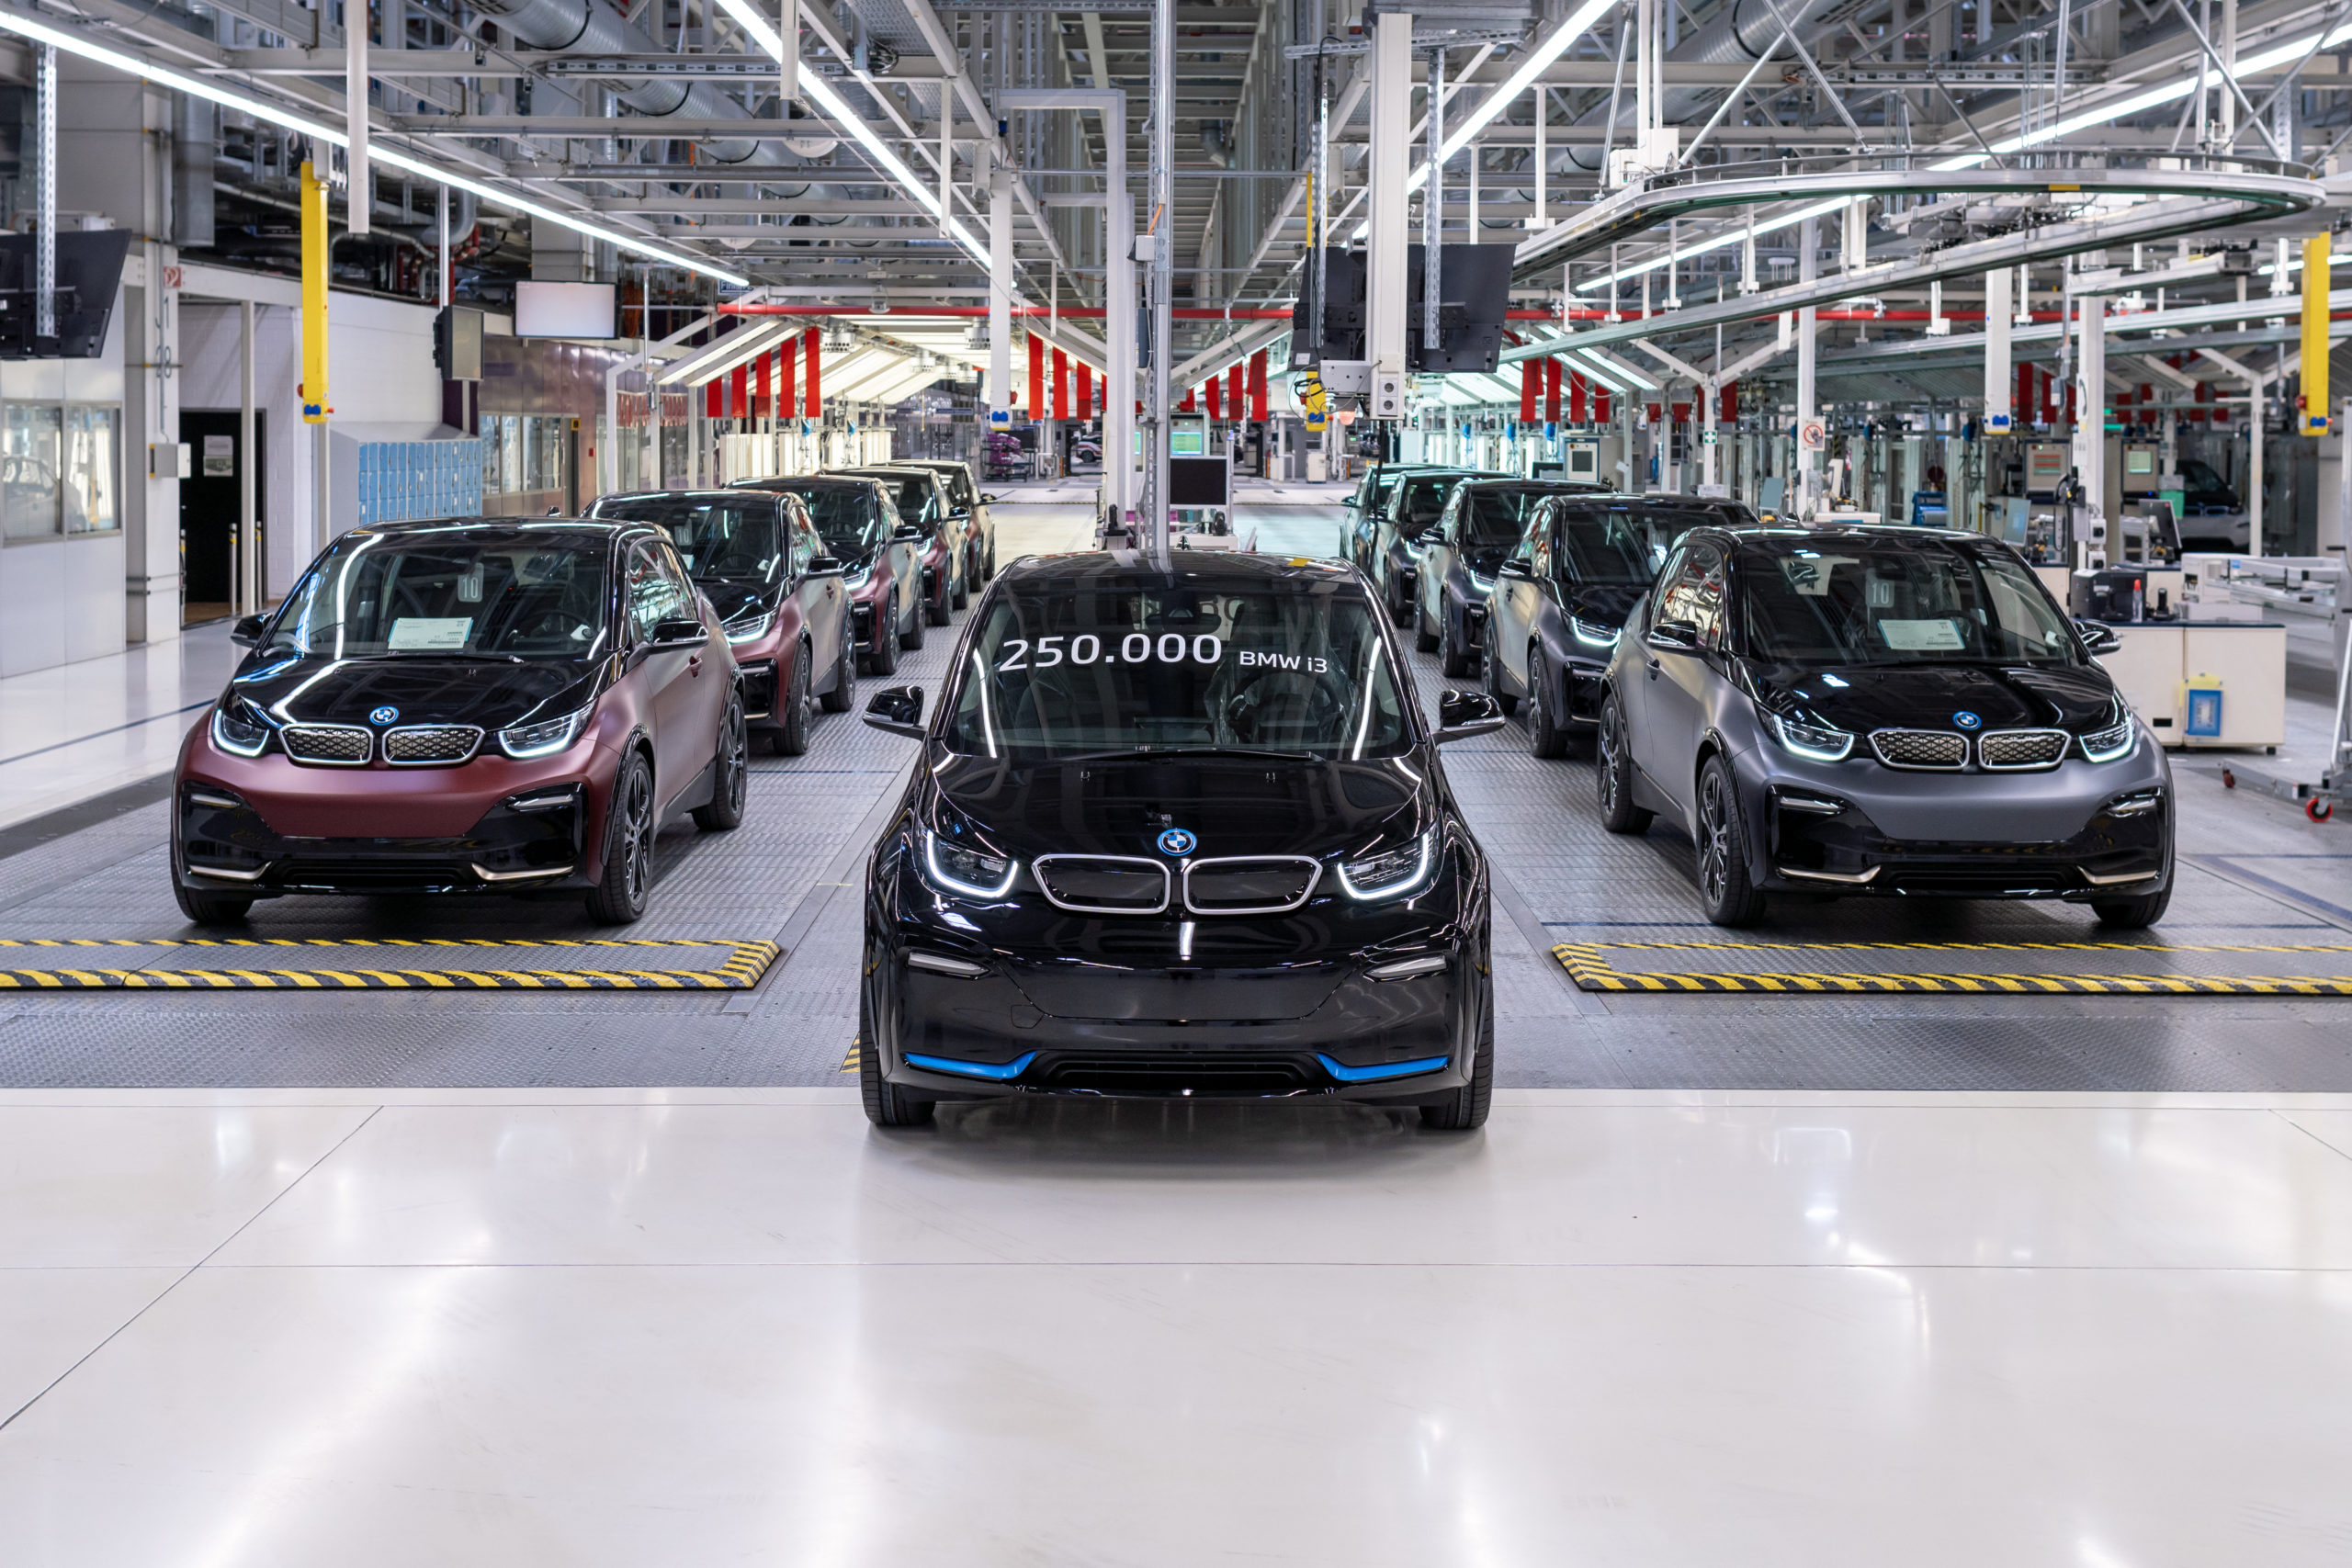 The 250,000th BMW i3 together with the BMW i3s of the HomeRun Edition from the BMW Group Plant Leipzig